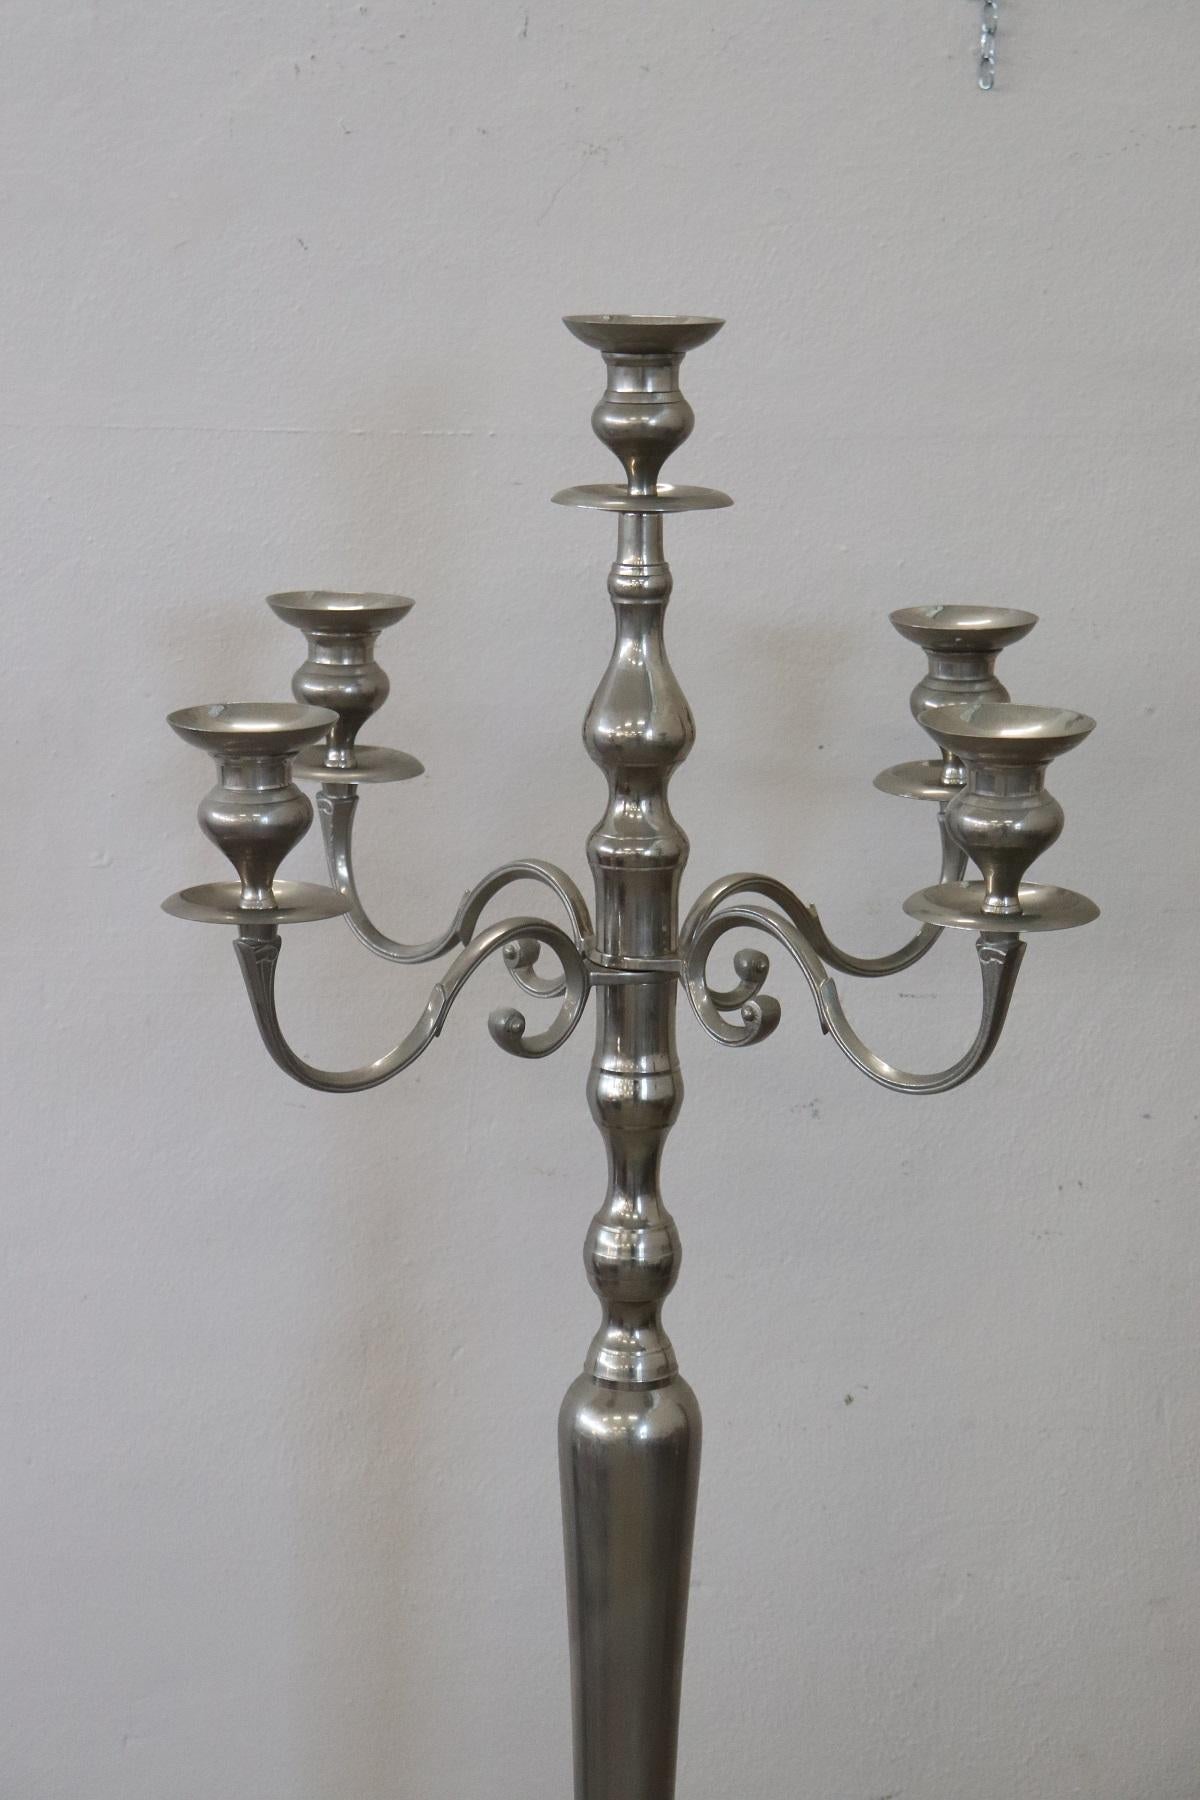 Rare large candelabrum in forged metal with 5-arms for 5-candles. Very special furniture in silver colored metal.